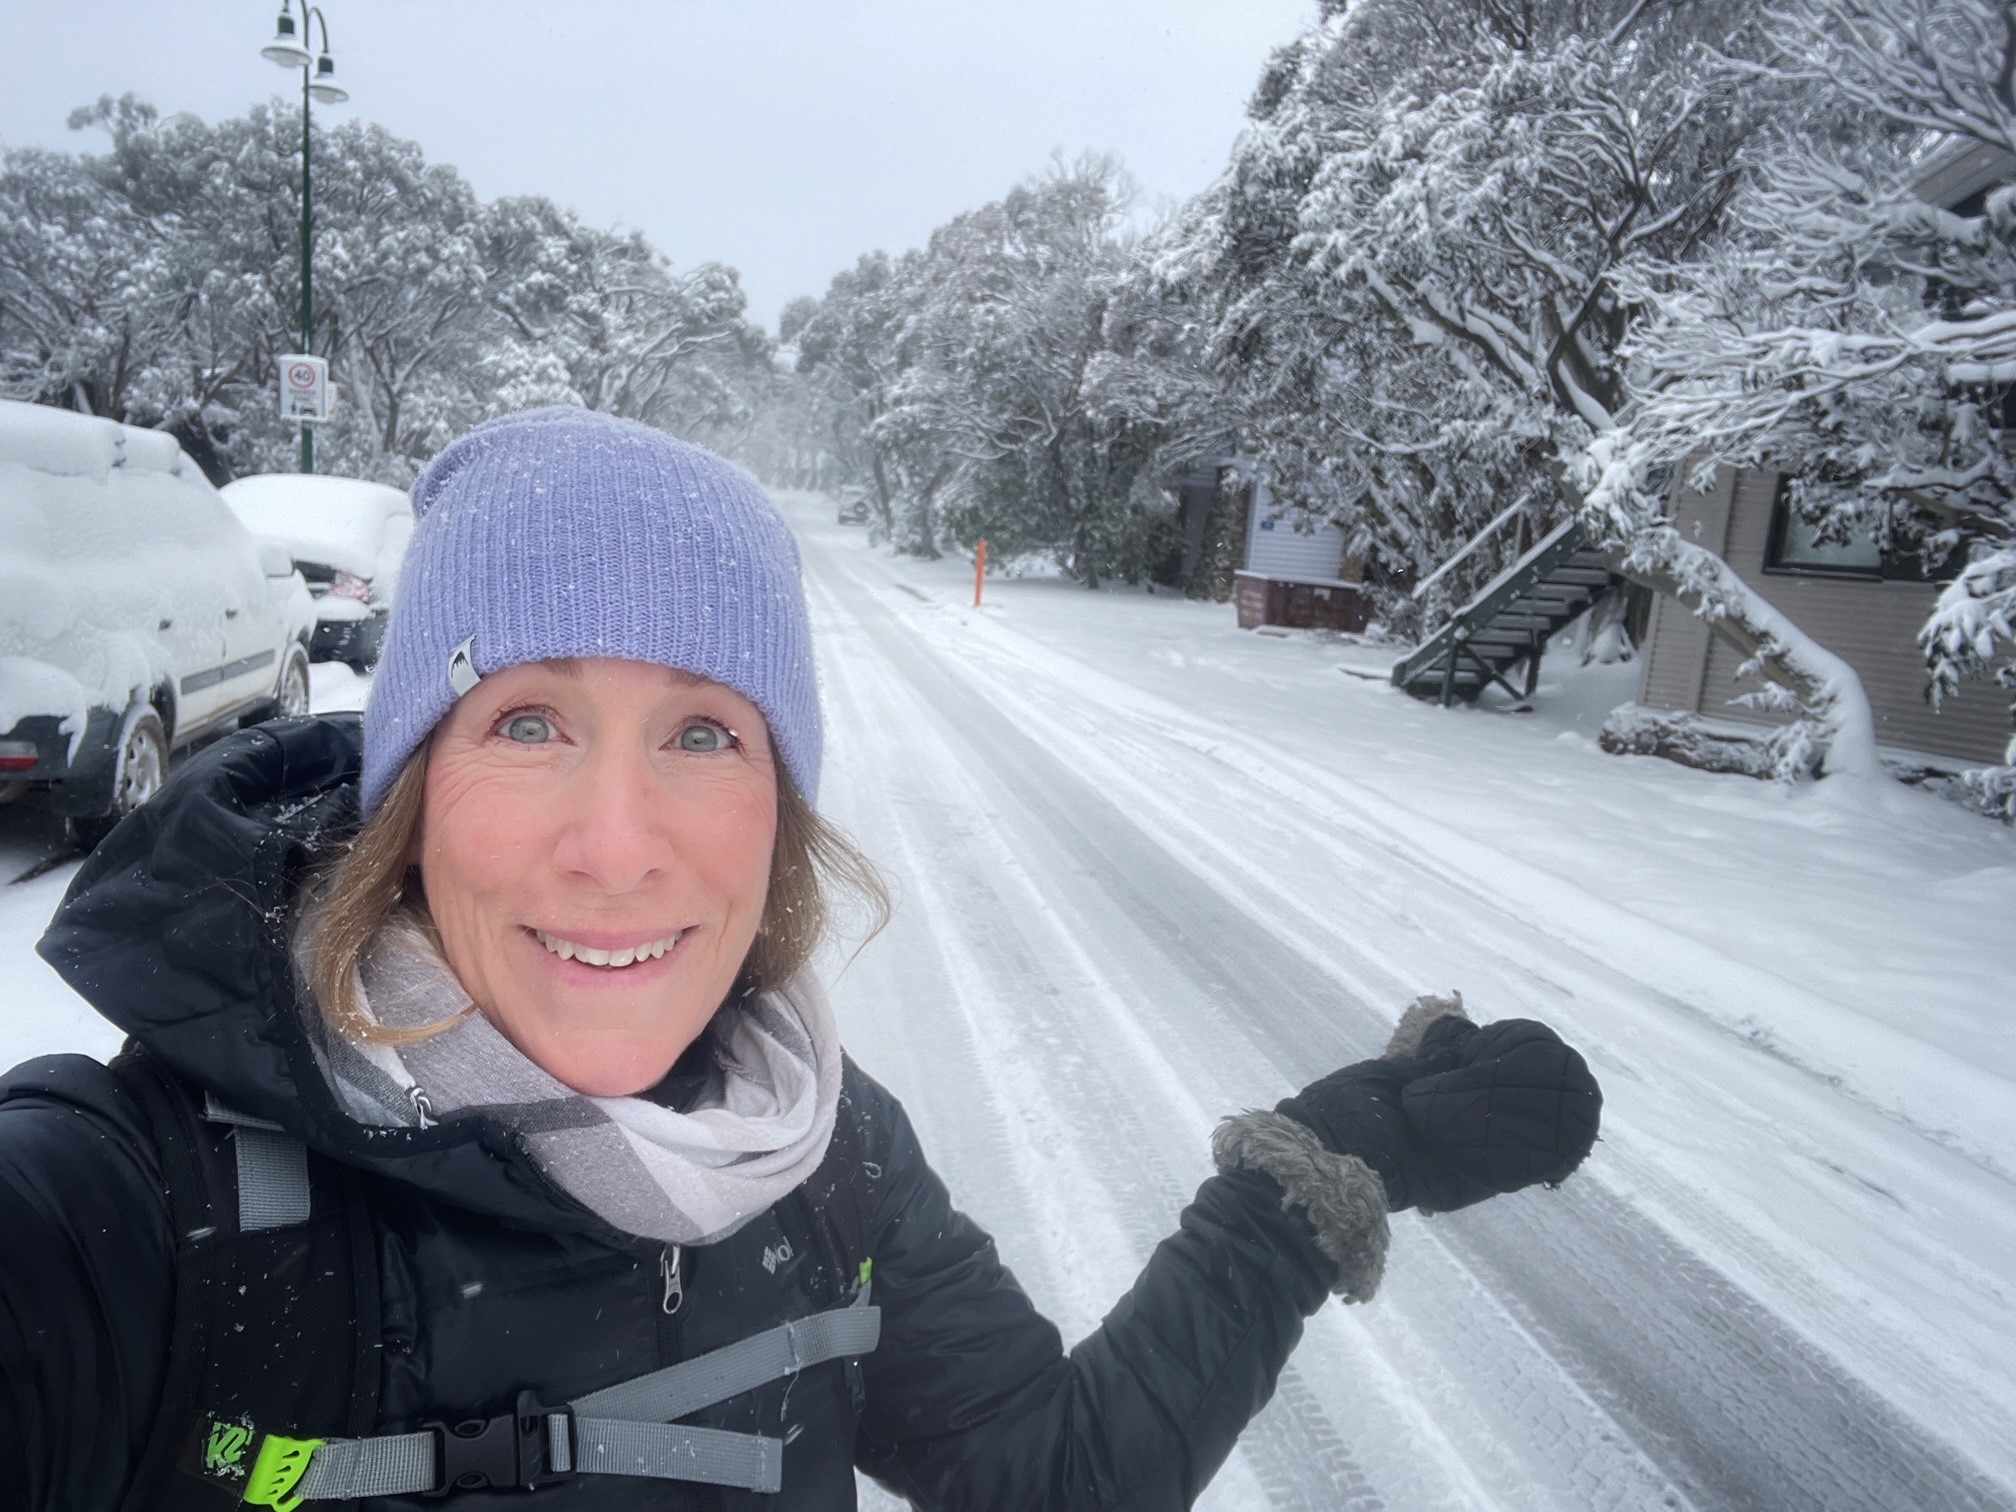 A smiling woman in a beanie stands on the side of a snow-covered road.